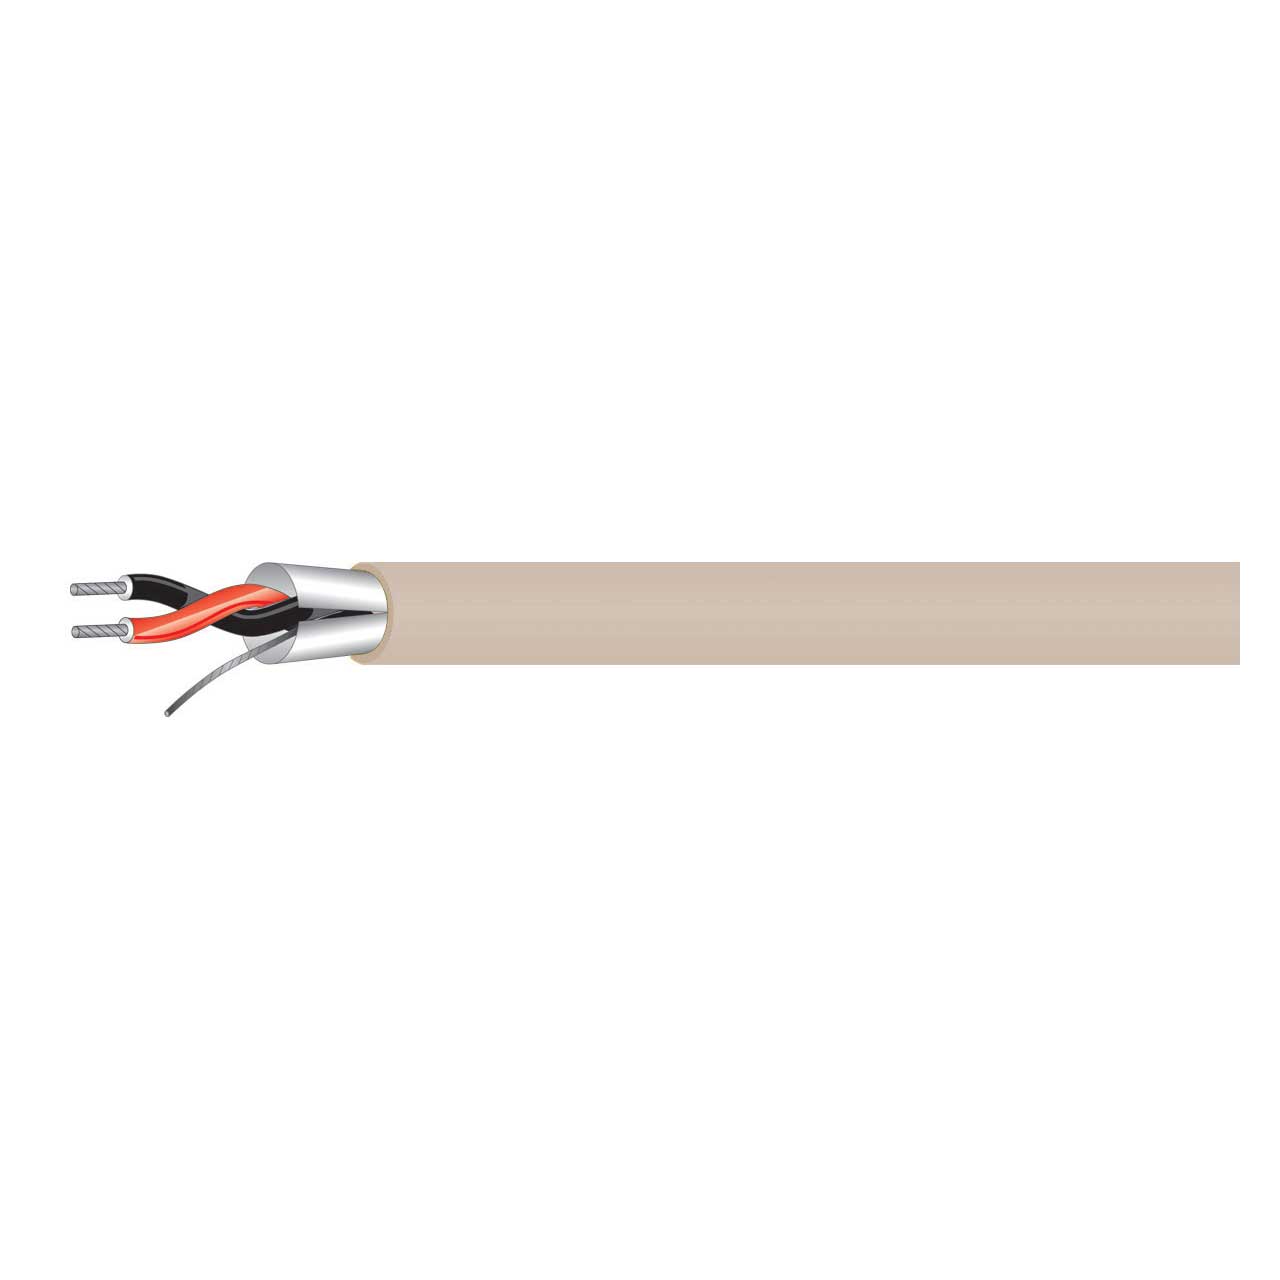 West Penn 454 1P 22G Stranded Shielded Miniature Line Level Audio Cable - Tan - 500 Foot  454TN0500